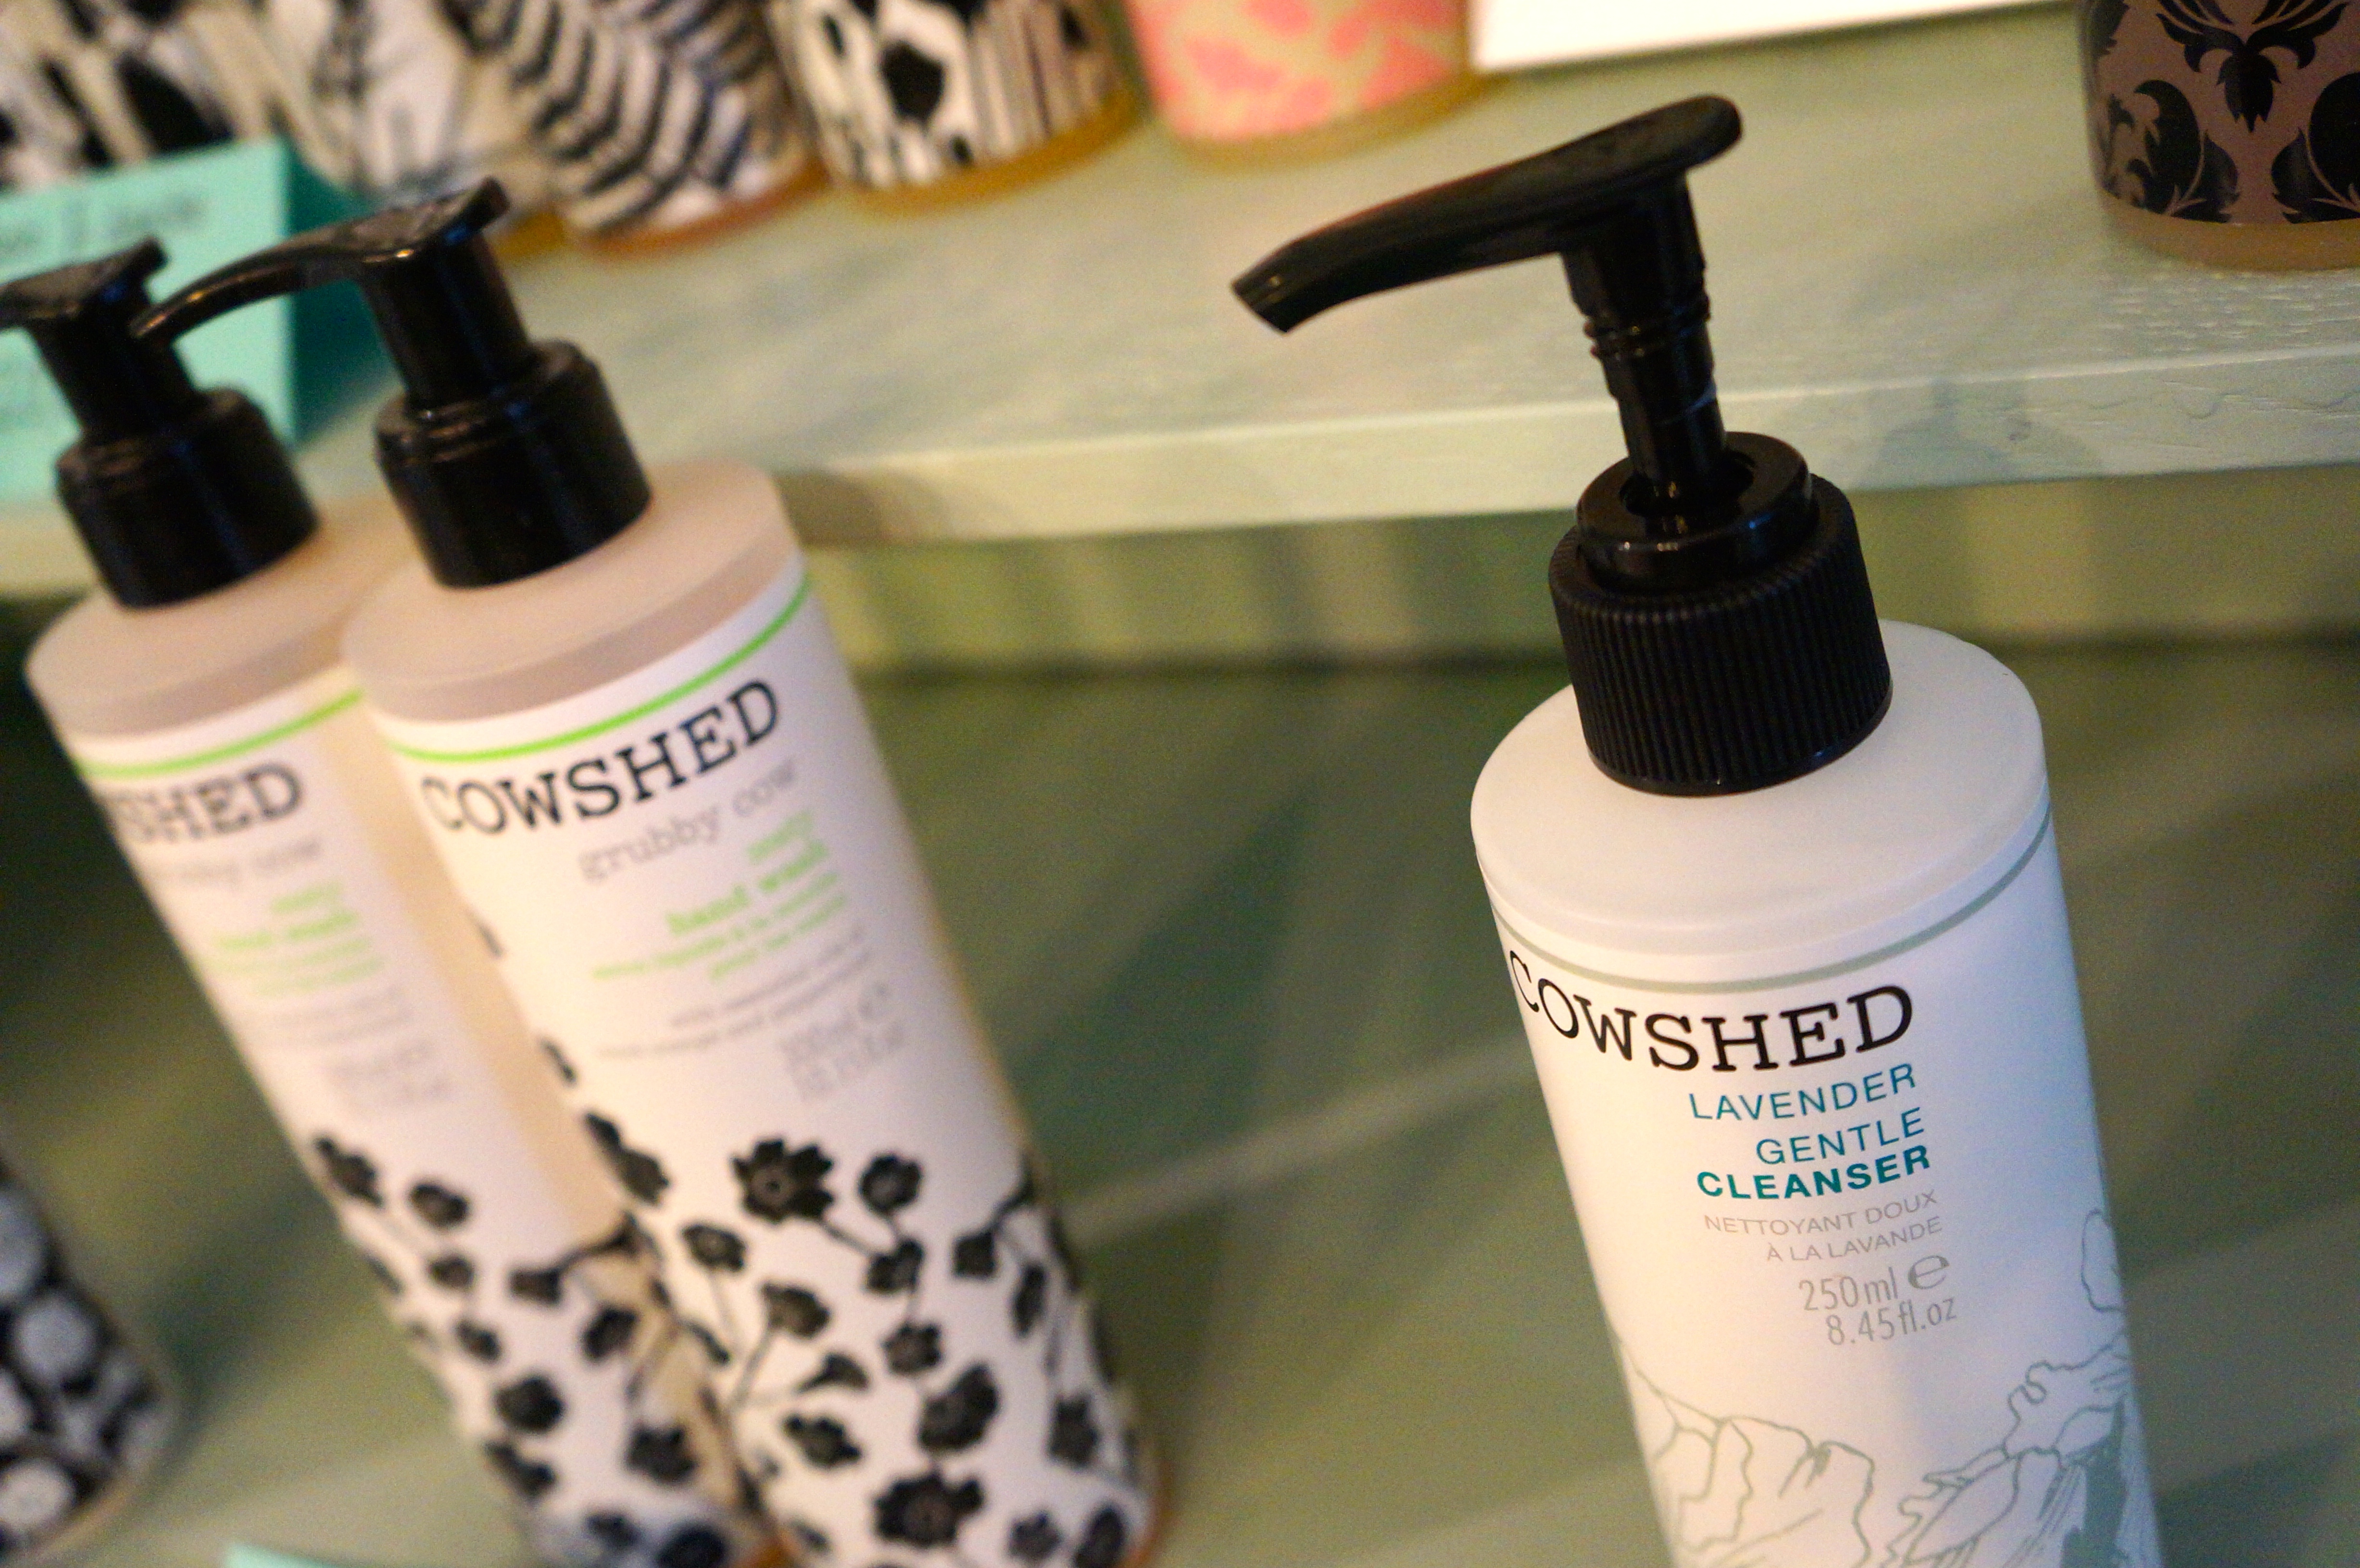 Cowshed facial cleanser/ Pic by kiwikoo.